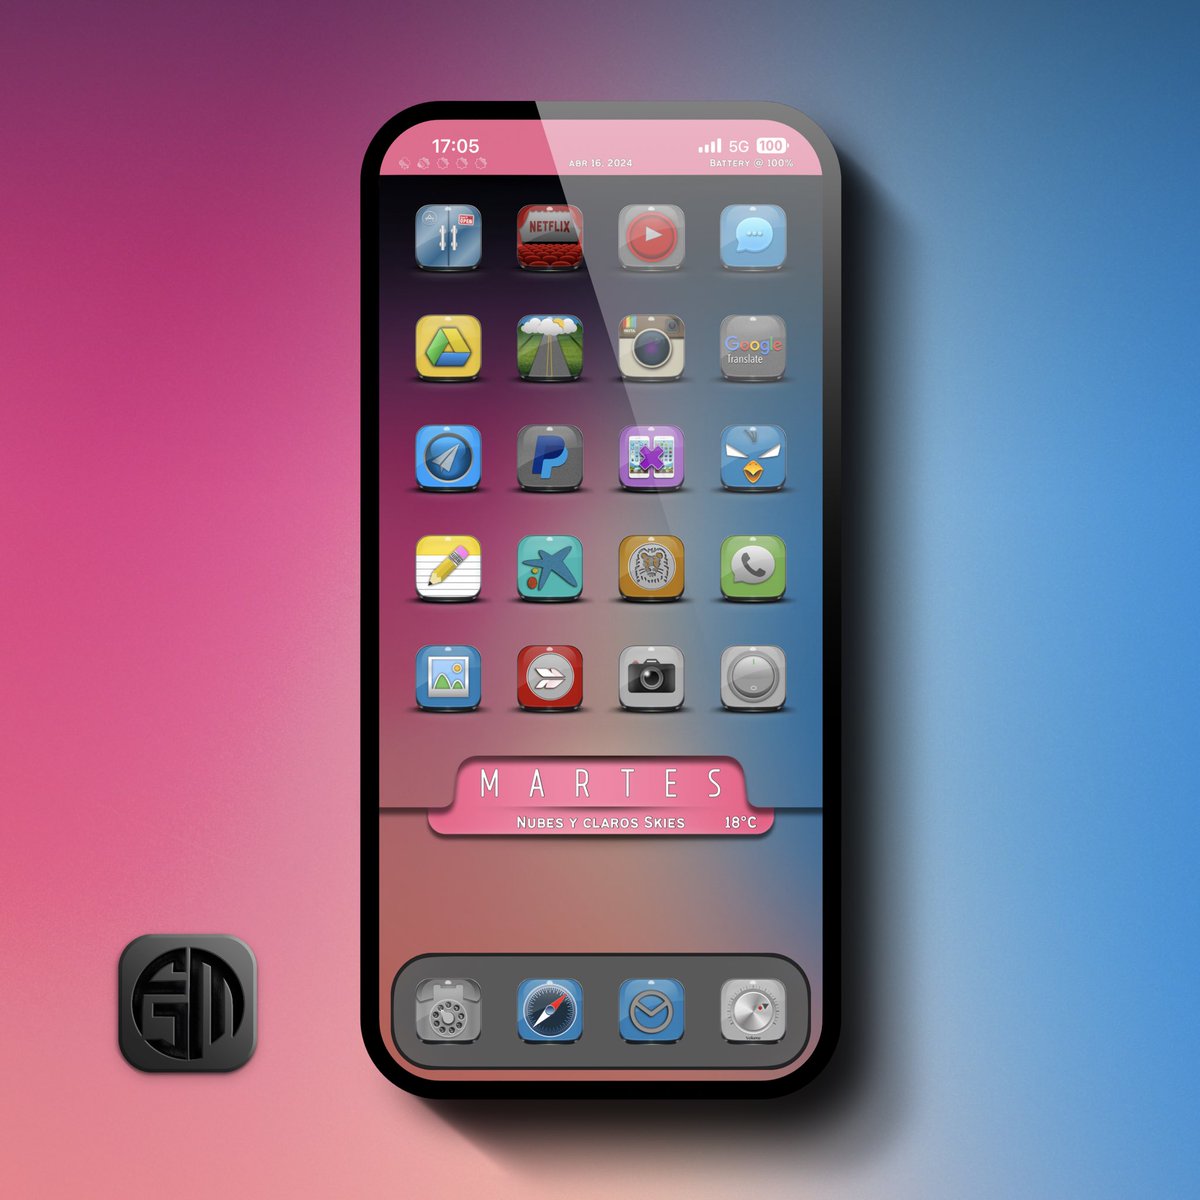 Good Afternoon🙋🏽‍♂️📱13 Pro Max🕺🏽YoorWeather😍🔥by @JCRocky5 M and ShowAE🔥😍by @SeanKly beautiful Flossy icons😍by the great @SteveMeyer420 SWAapp by @TeboulDavid1 wall by mi carnal @alex2clemente Over lay by @kyawthihaphyo @EliseMihael @UtdAll @thgr34td4n3 @Leonel182520 @luis9_49